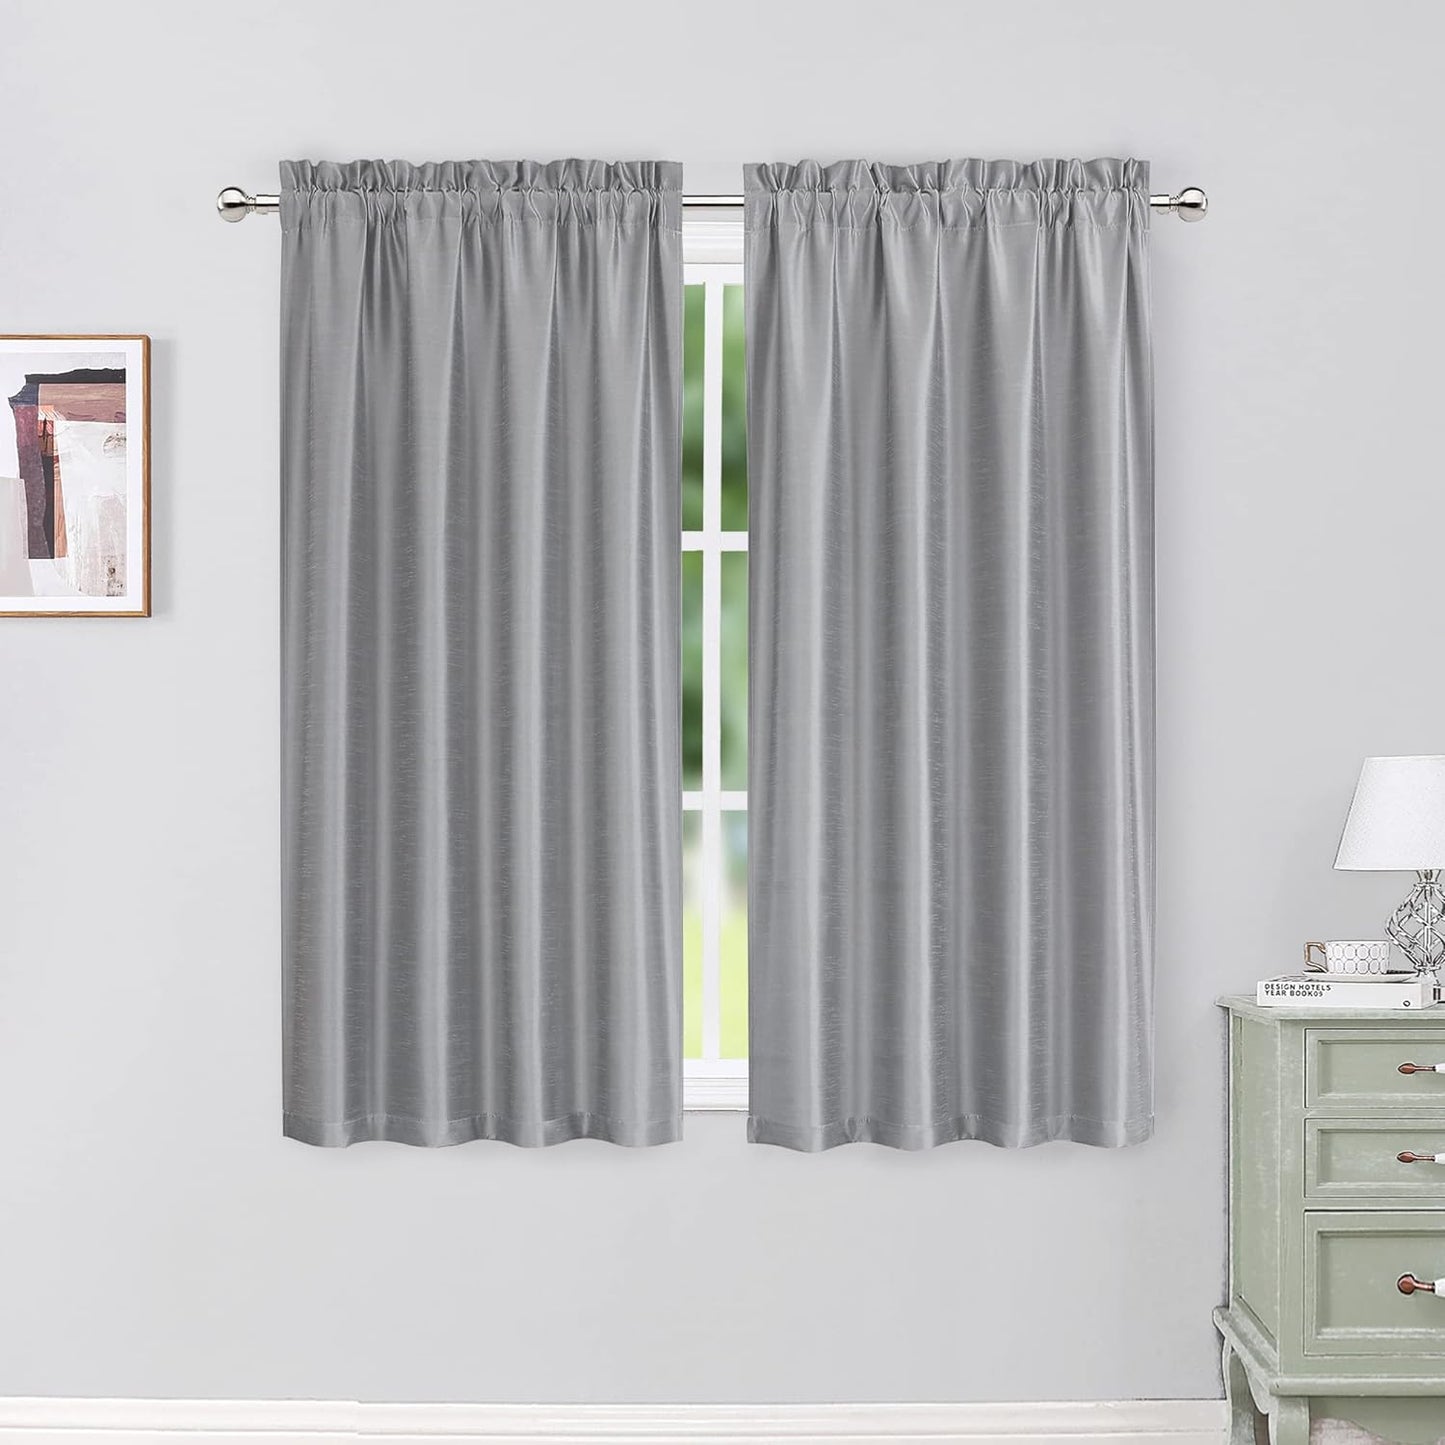 Chyhomenyc Uptown Sage Green Kitchen Curtains 45 Inch Length 2 Panels, Room Darkening Faux Silk Chic Fabric Short Window Curtains for Bedroom Living Room, Each 30Wx45L  Chyhomenyc Silver Gray 2X30"Wx54"L 